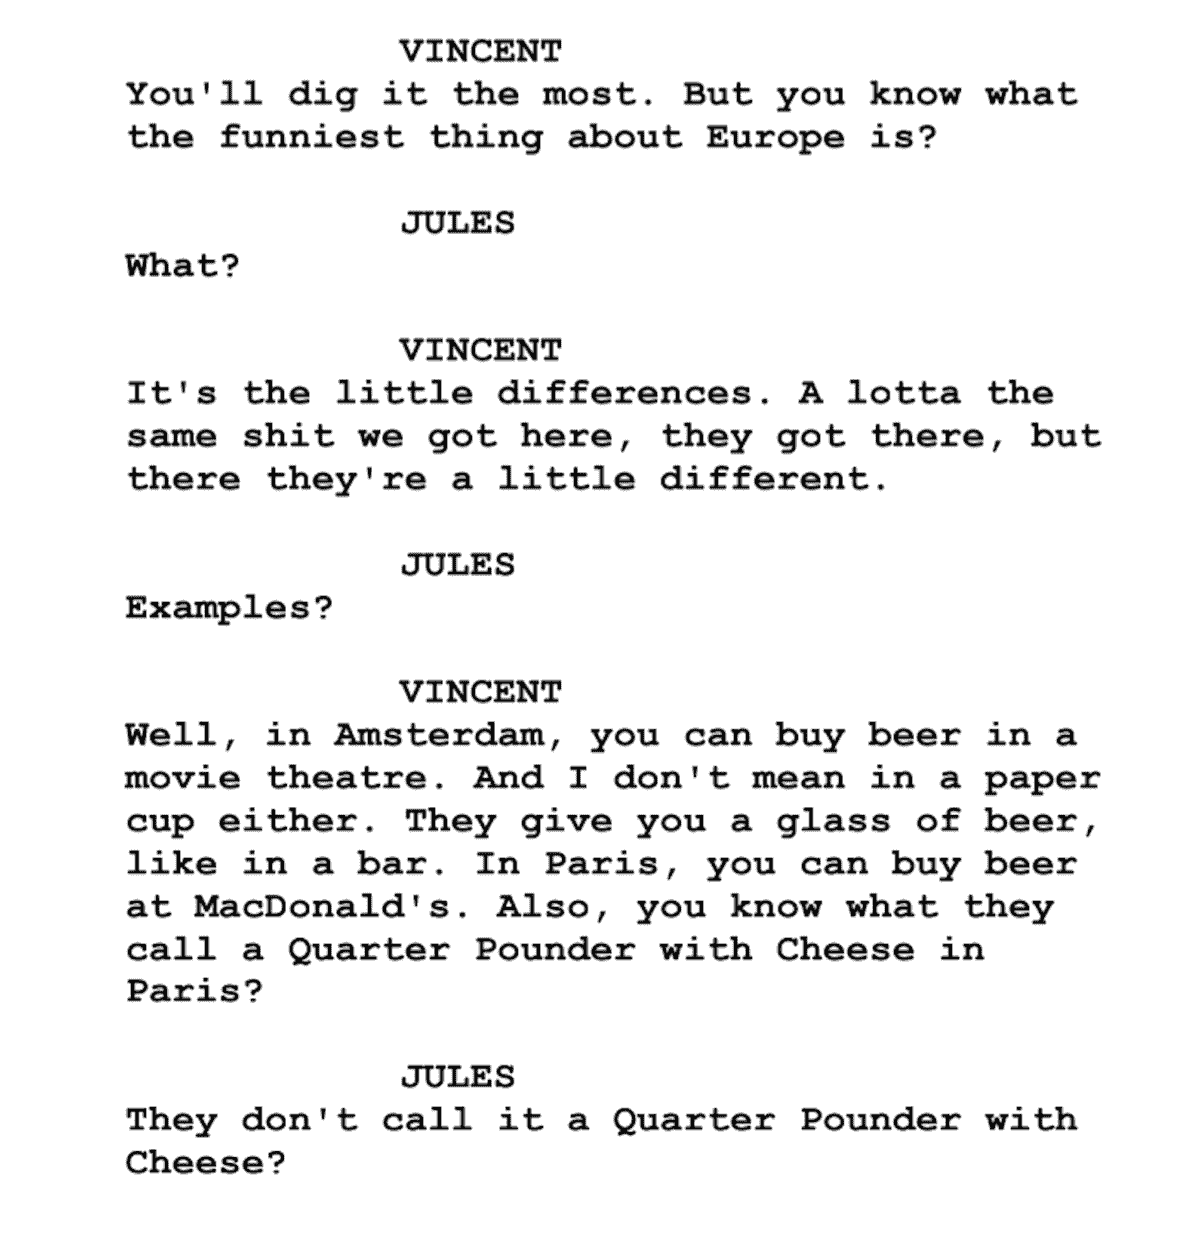 Screenplay Examples - Pulp Fiction Script - Screenplay Snippet 11 - Quarter Pounder with cheese